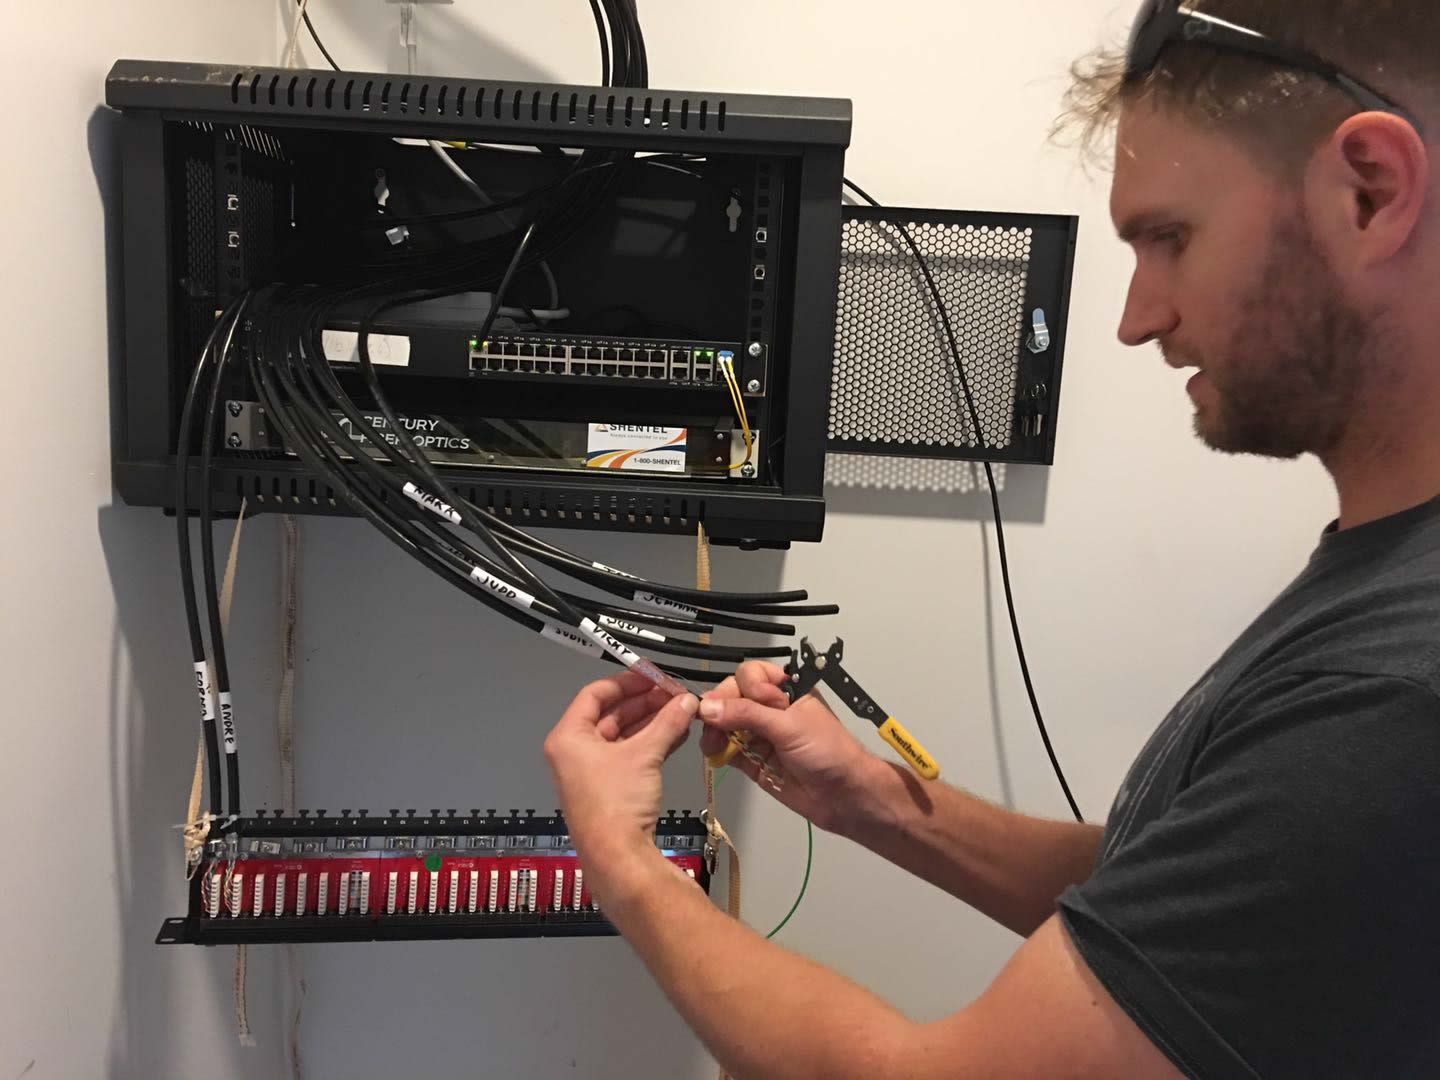 Alex Ryan prepares Cat6 cable in the network server rack.